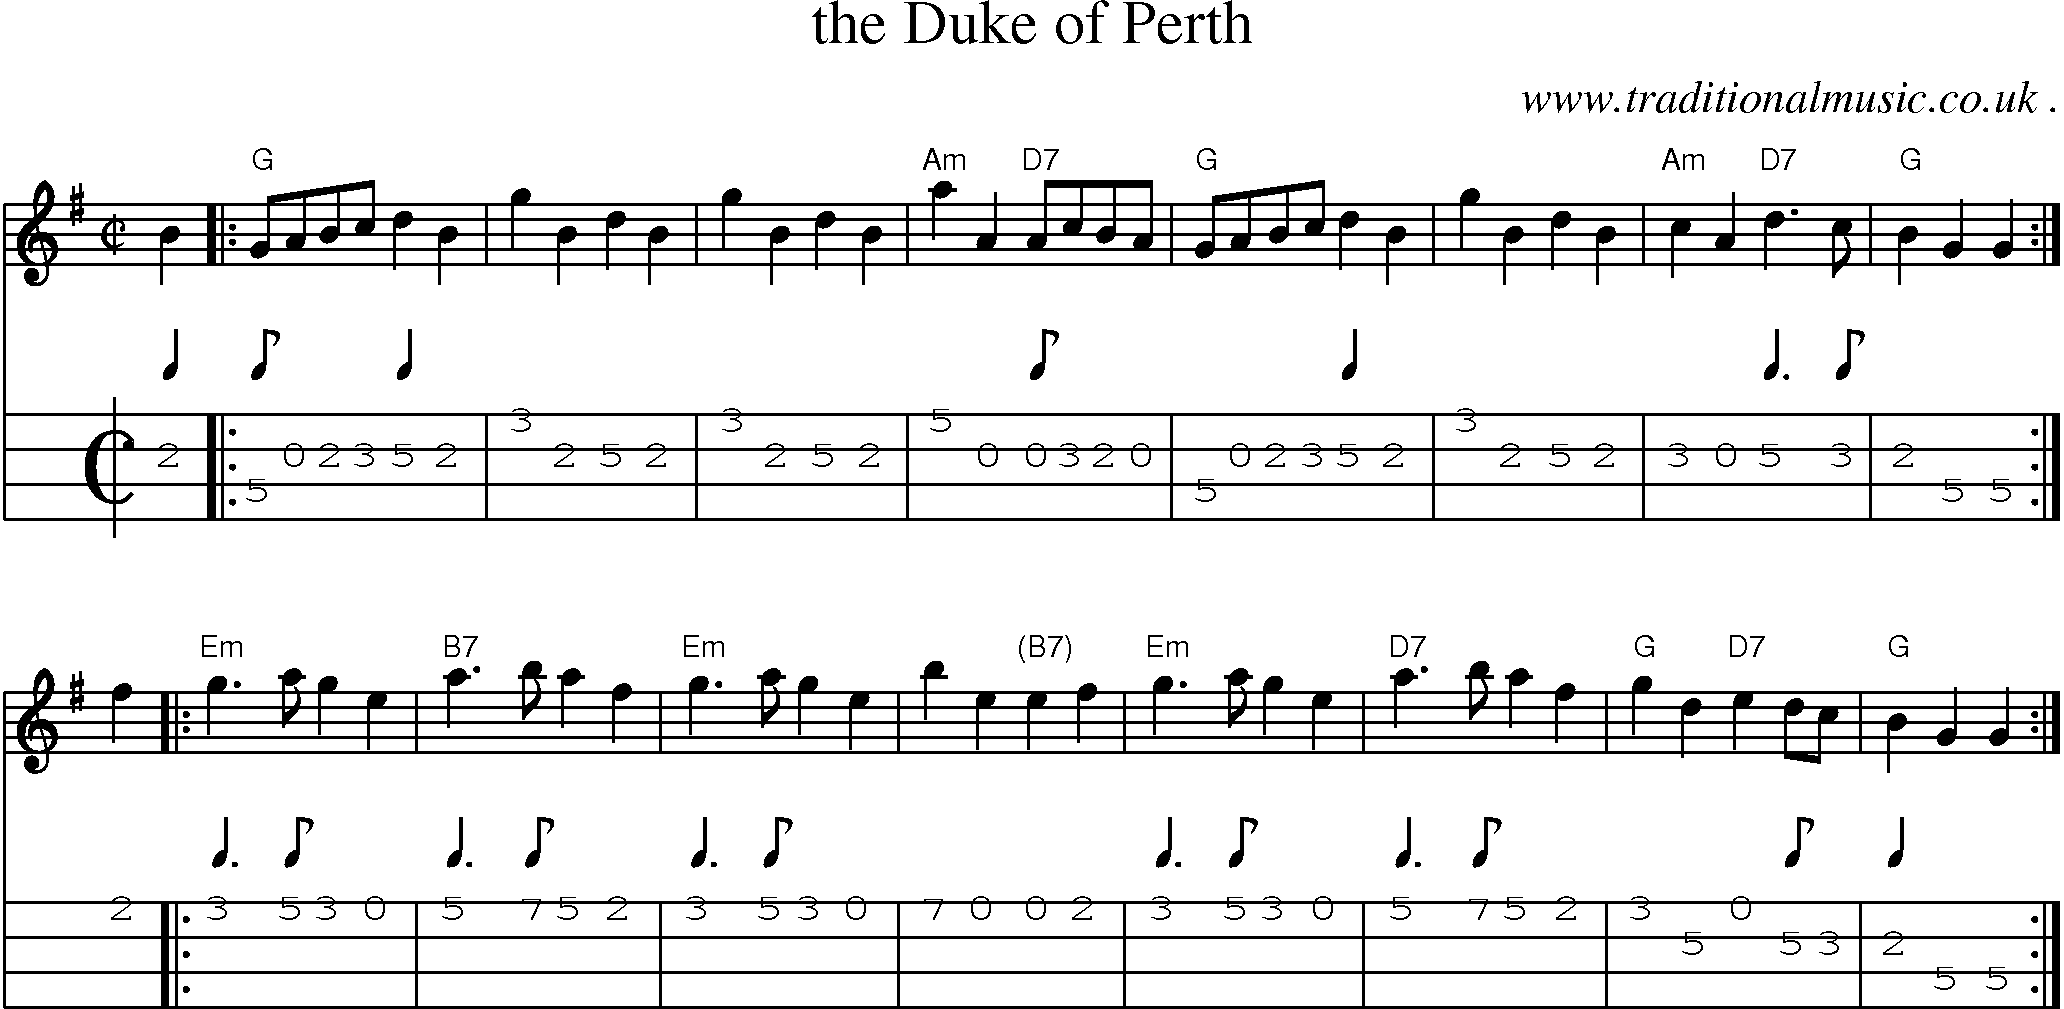 Sheet-music  score, Chords and Mandolin Tabs for The Duke Of Perth